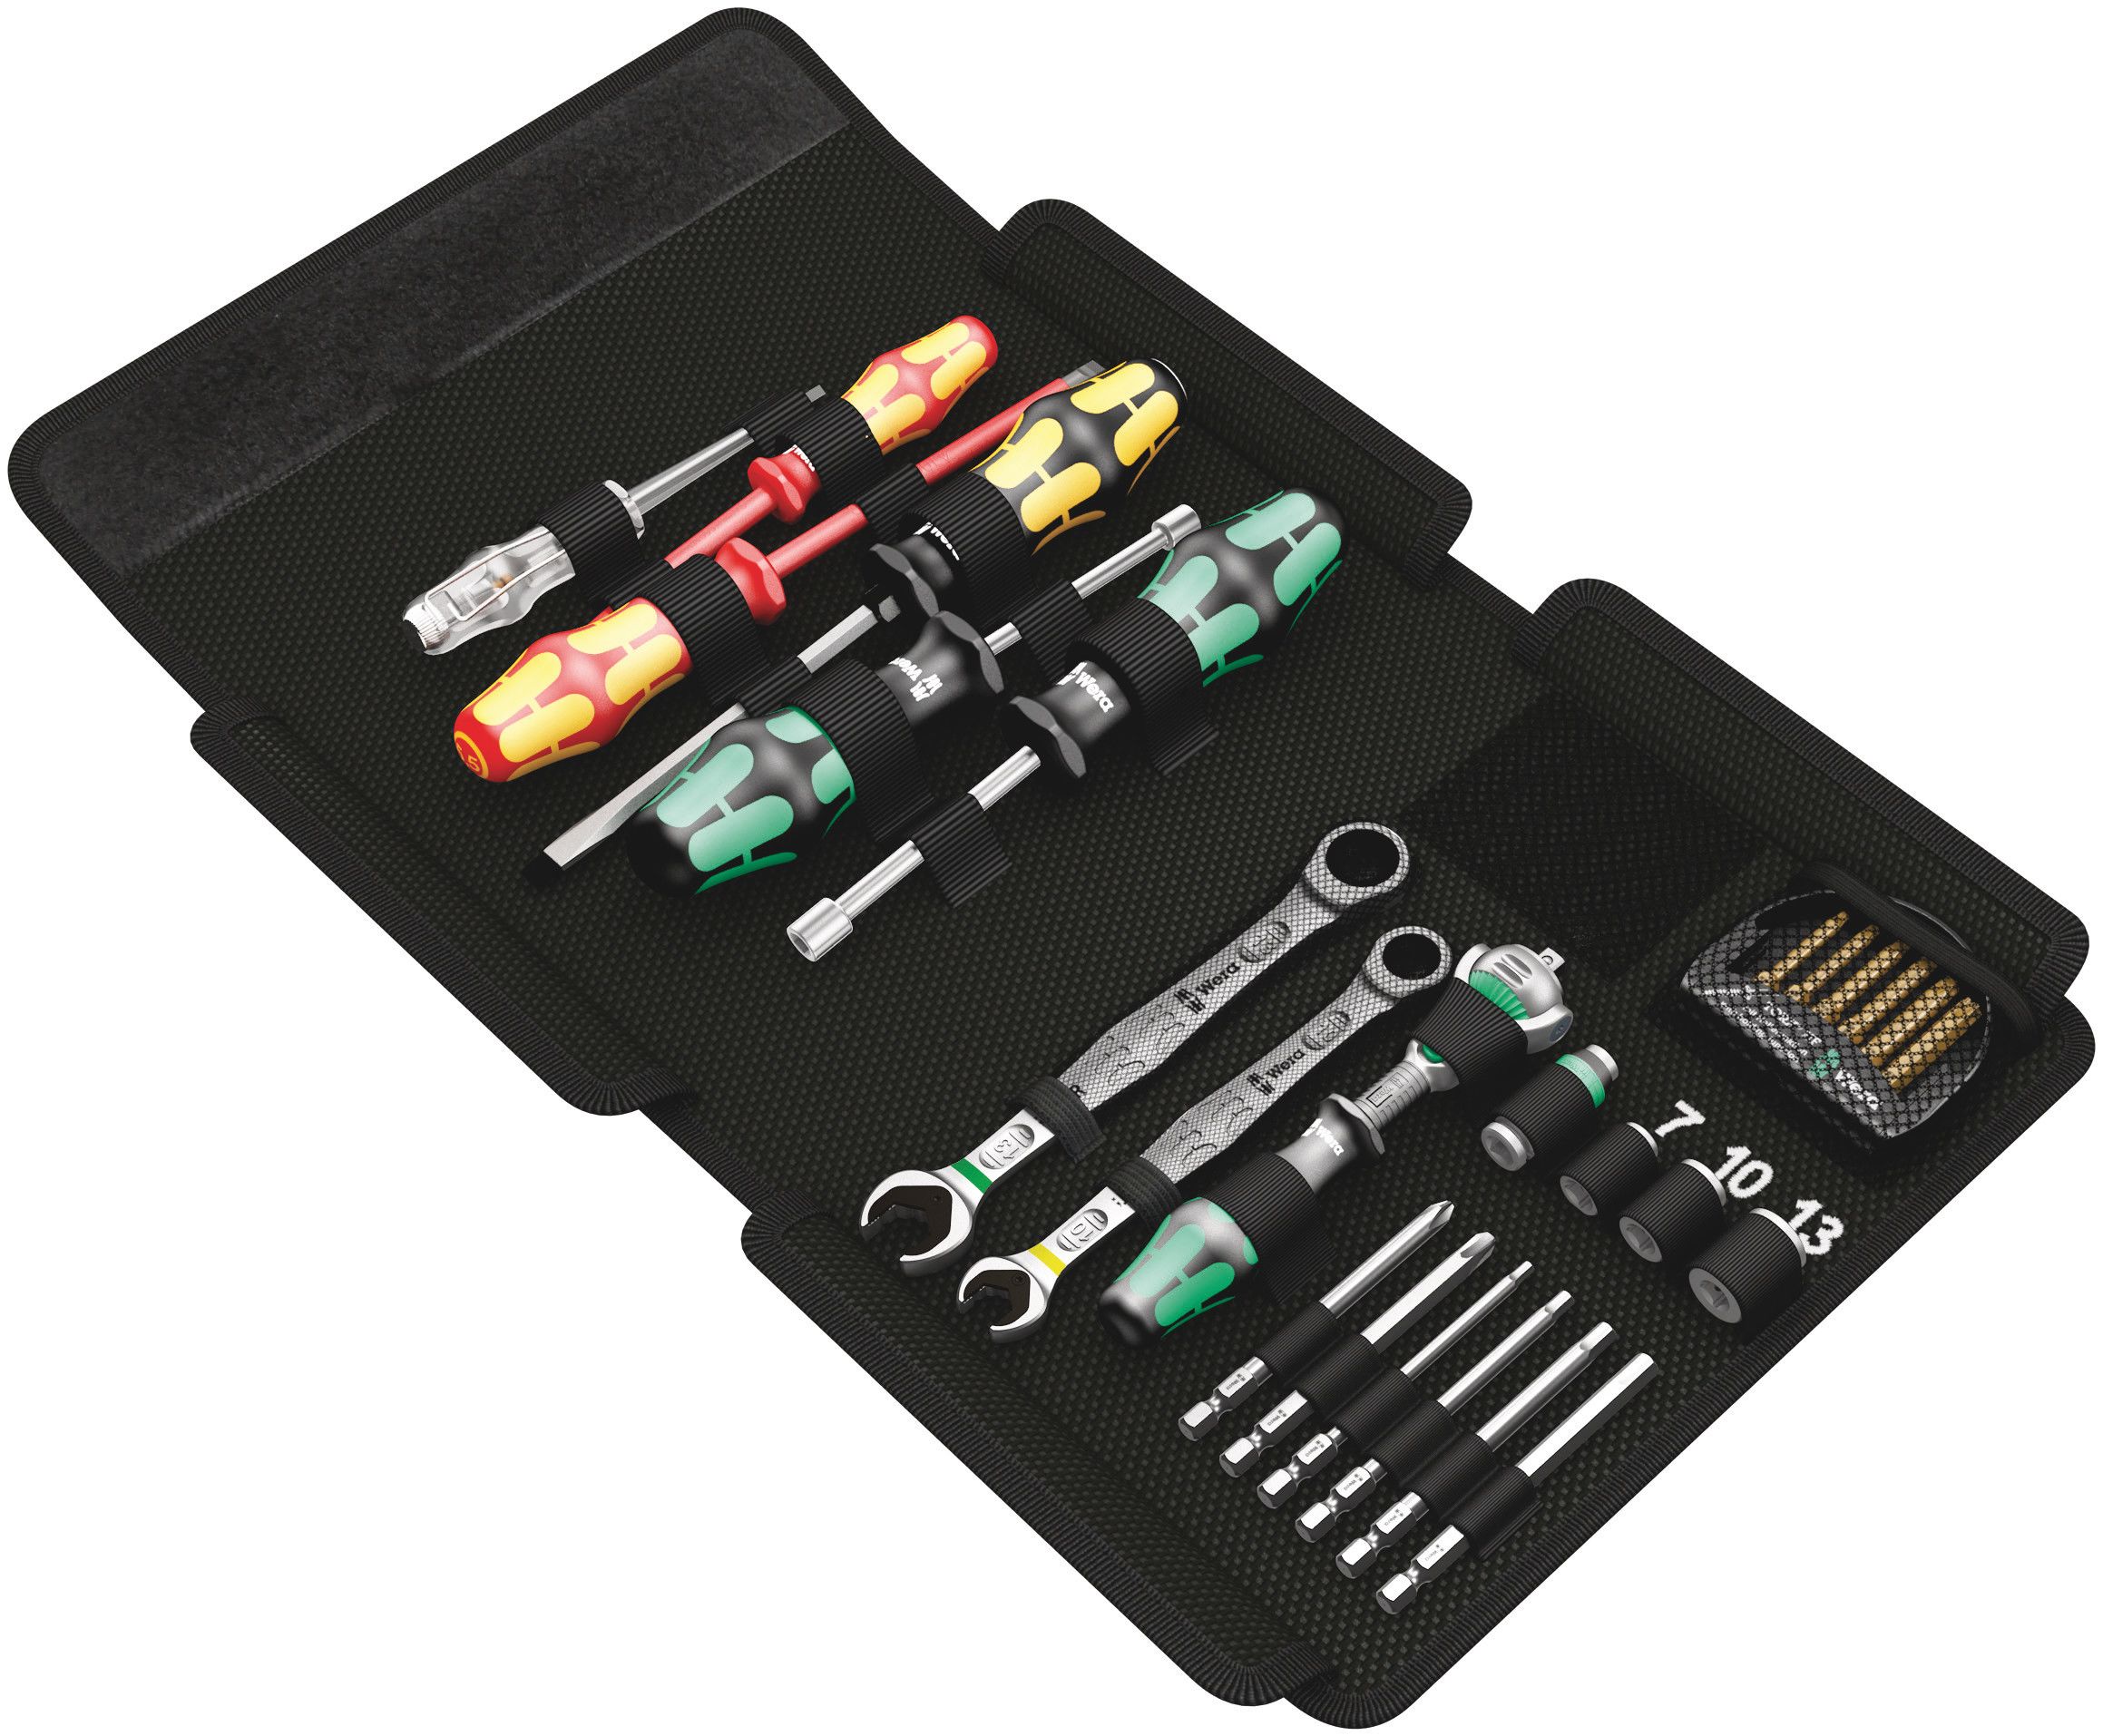 Wera 25 Piece Plumbing and Heating Tool Kit with Pouch, VDE Approved